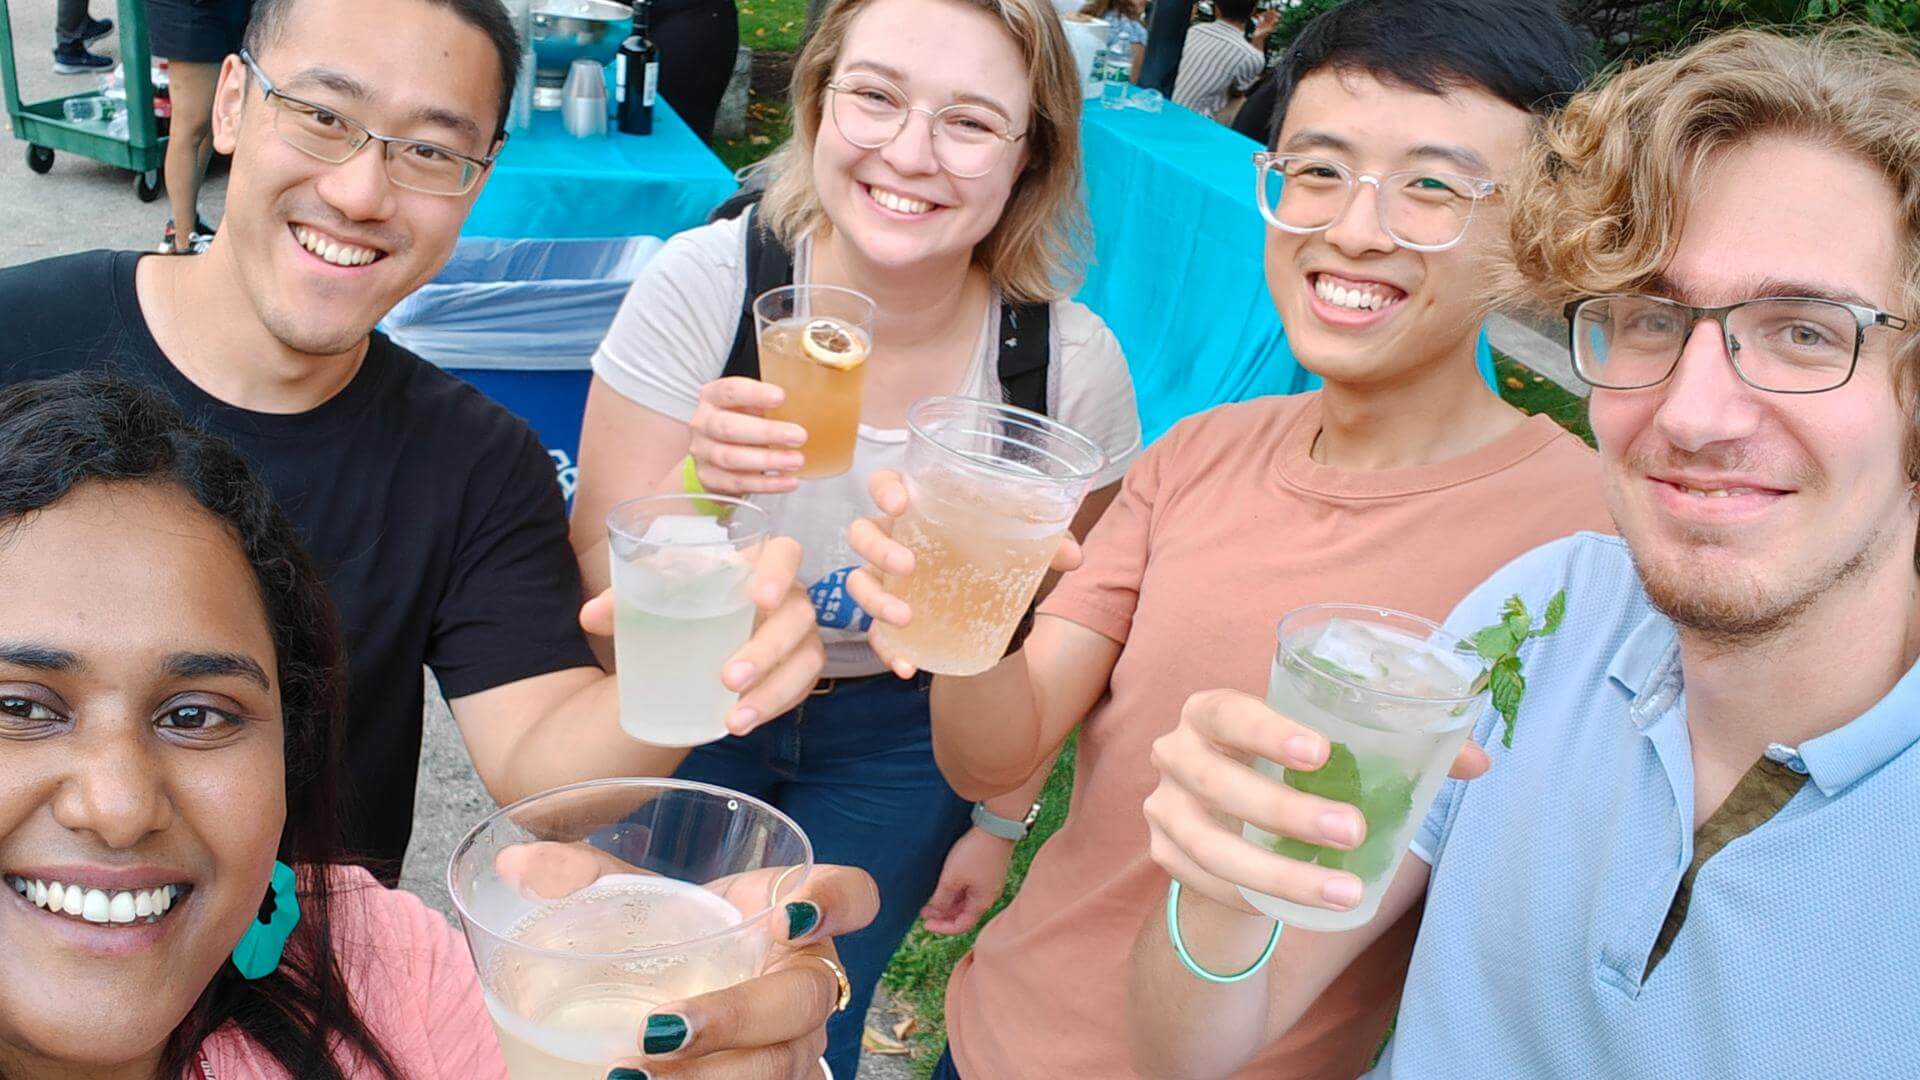 A group of people holding drinks